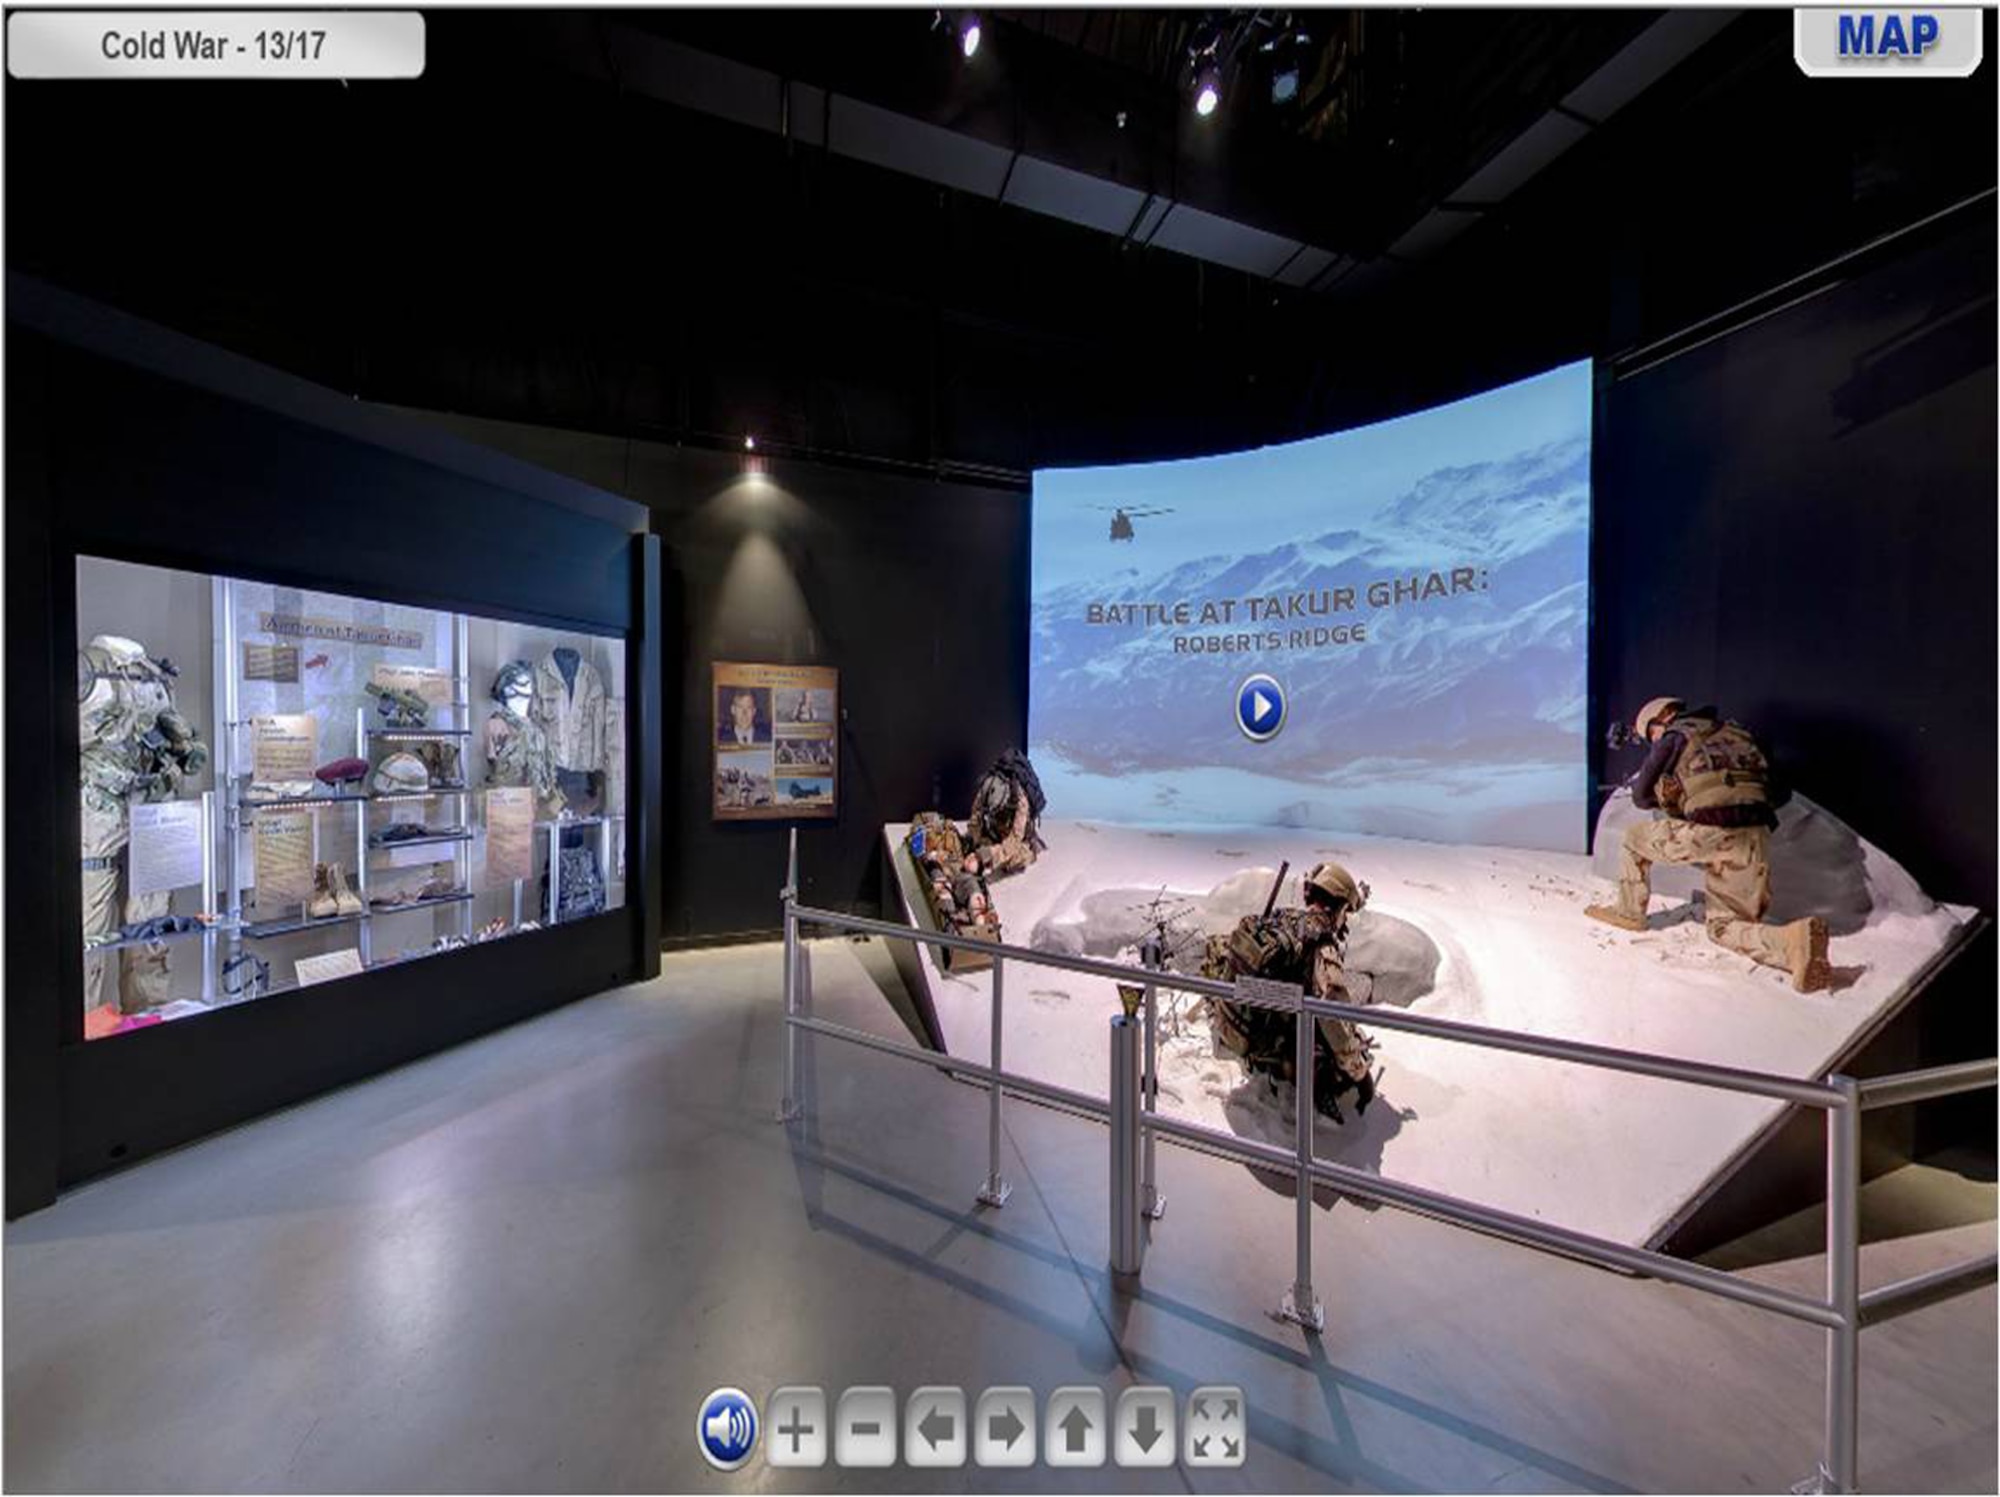 A screenshot of "Battle at Takur Ghar: Roberts Ridge" exhibit from the National Museum of the U.S. Air Force's Virtual Tour website. The exhibit is located in the Cold War Gallery. (U.S. Air Force image)